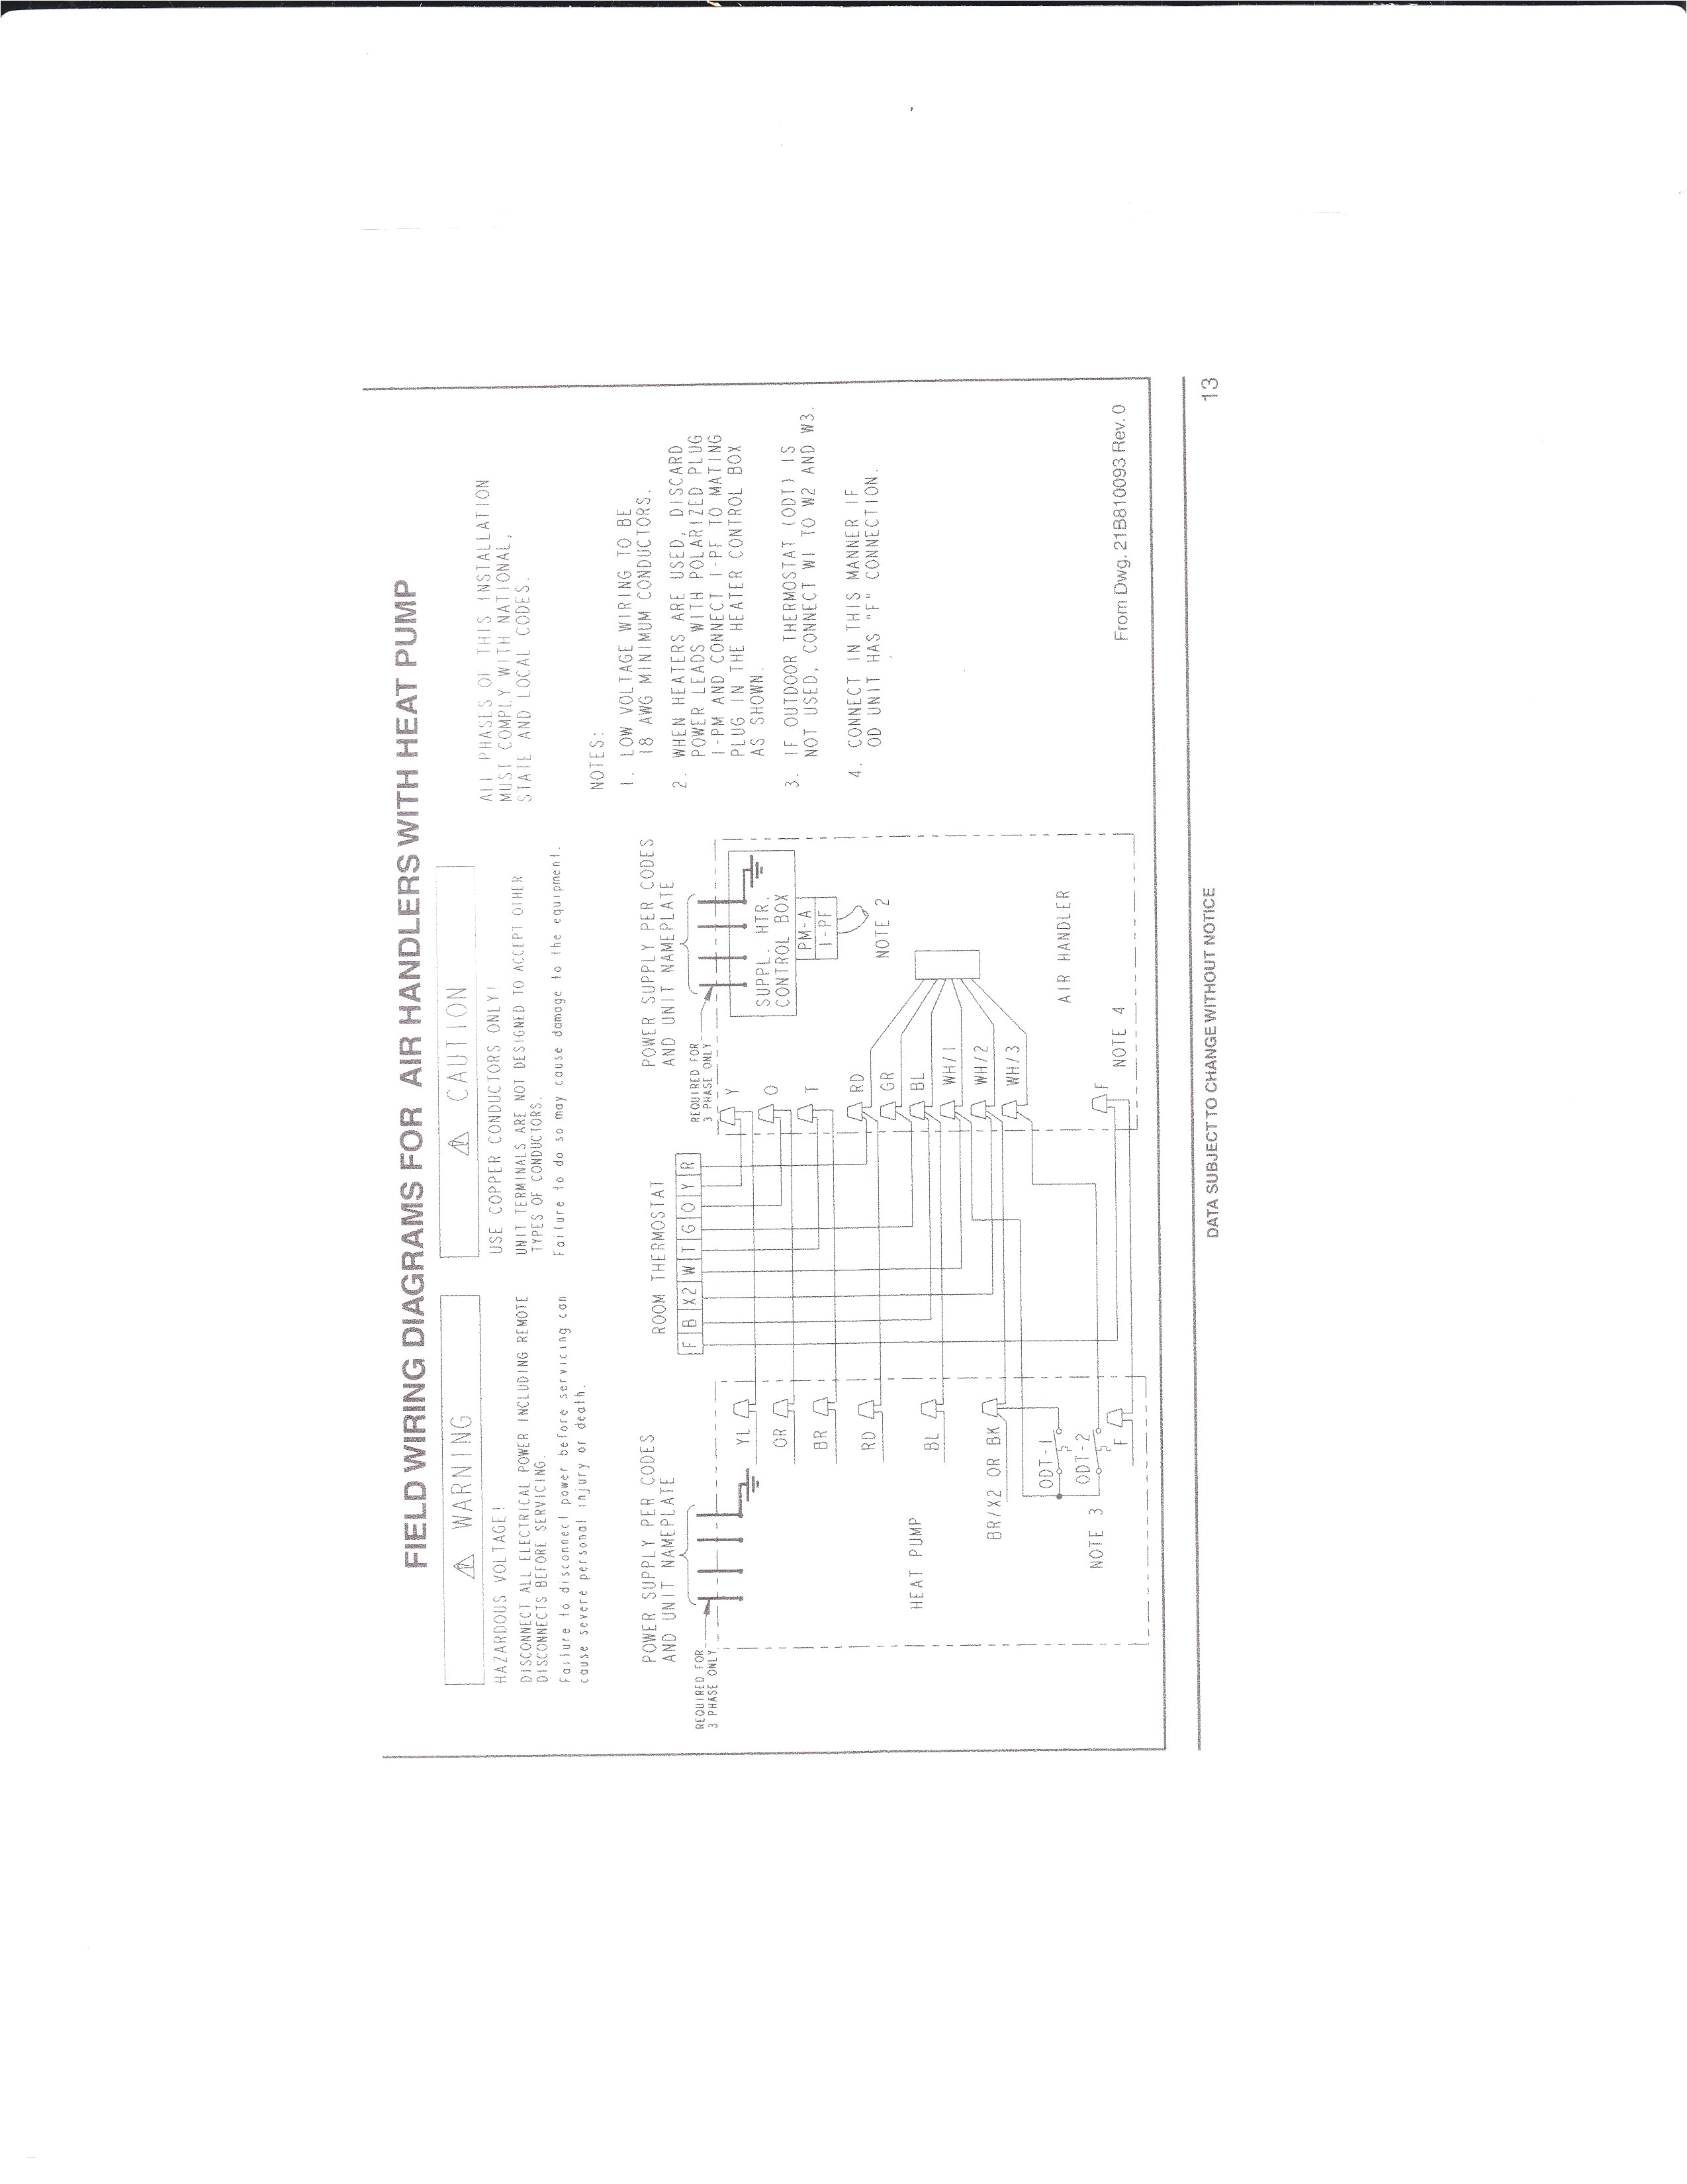 honeywell thermostat th5220d1003 wiring diagram electrical 7351 honeywell programmable thermostat wiring diagram